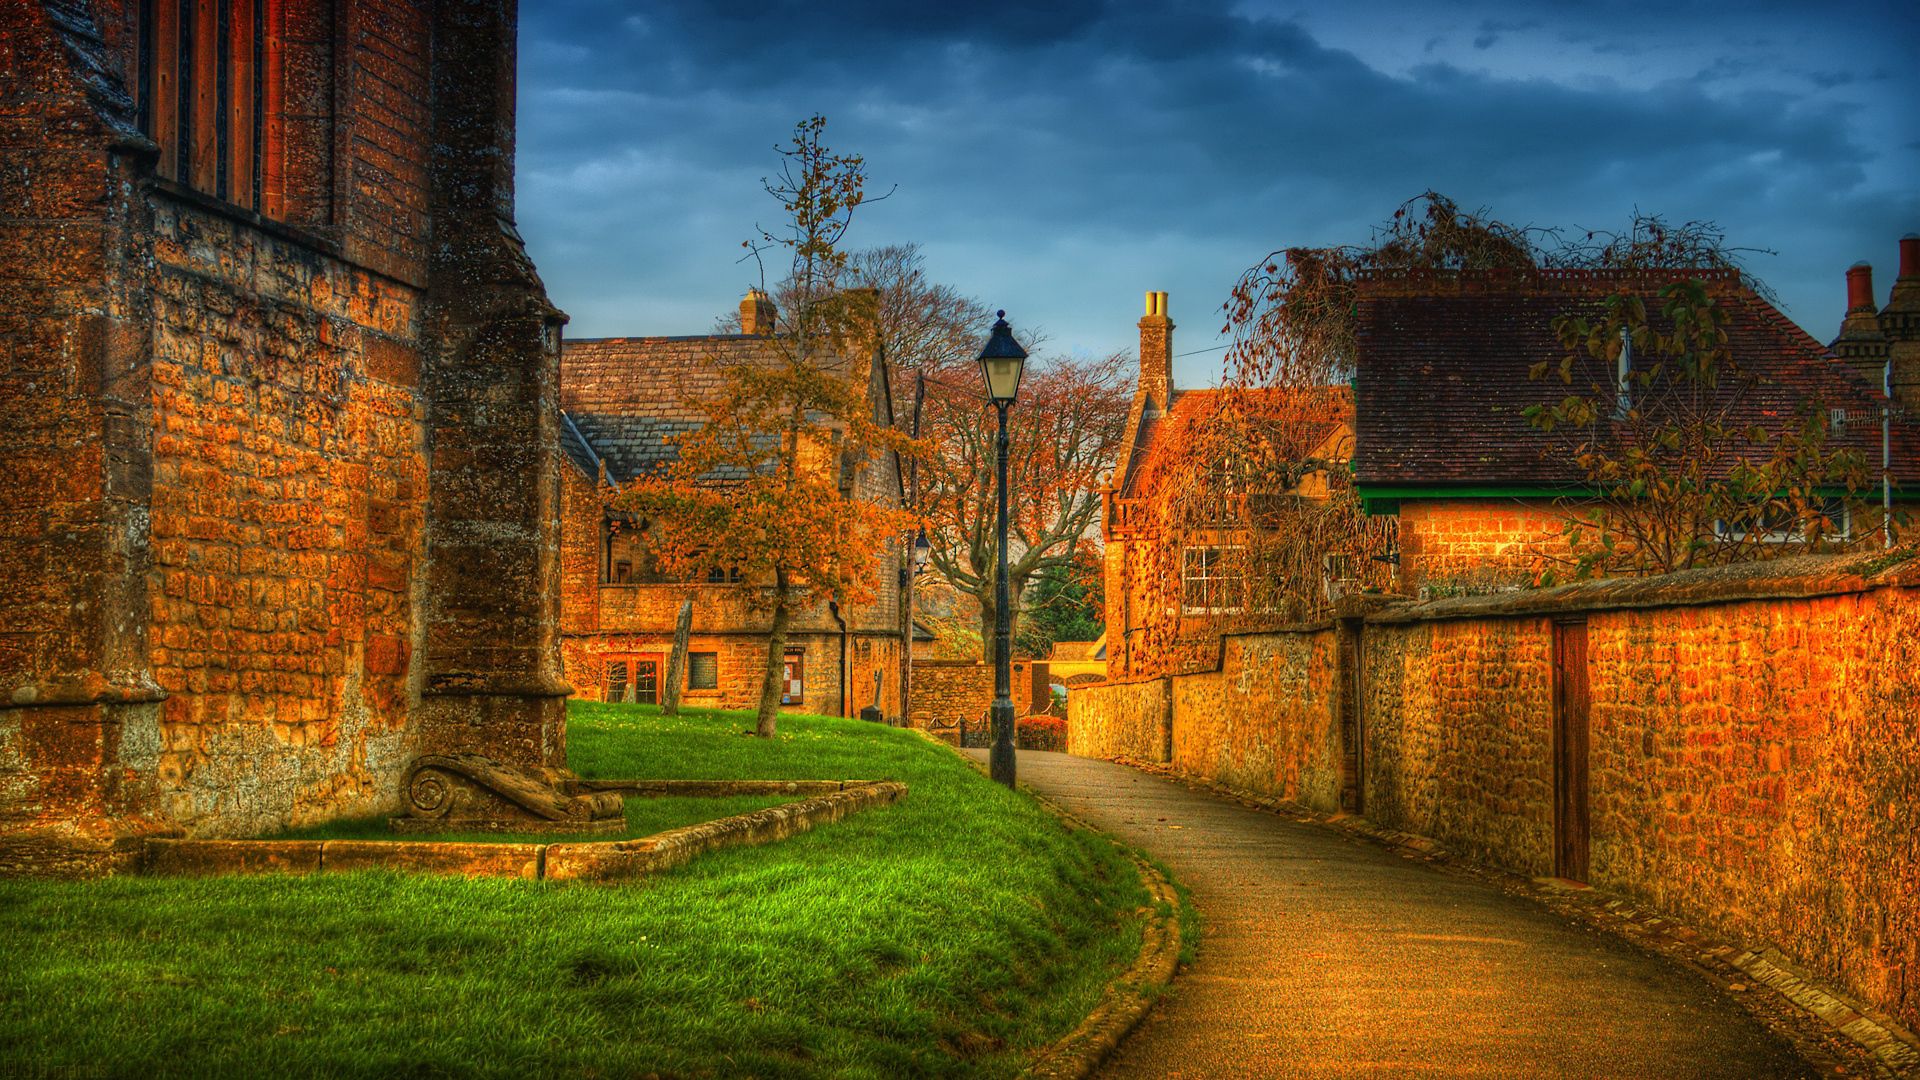 Walls cities, europe, hdr, park Free Stock Photos